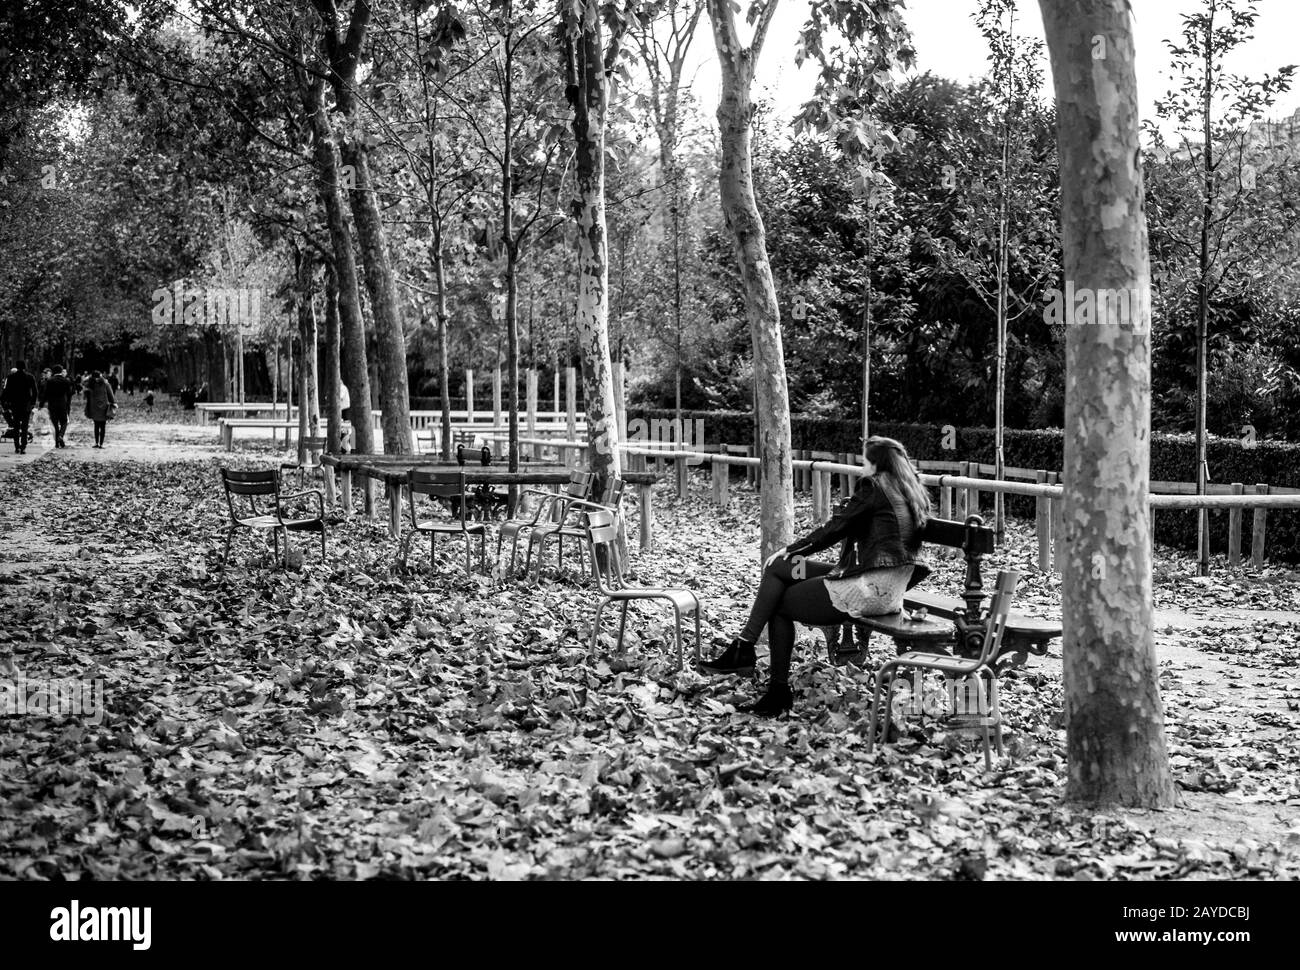 PARIS FRANCE JARDIN DU LUXEMBOURG - FALL SEASON SCENE WITH A YOUNG WOMAN SEATED ON A BENCH OF THE PARK - PARIS GARDEN AND PARC - PARIS WOMAN - BLACK AND WHITE PHOTOGRAPHY © Frédéric BEAUMONT Stock Photo